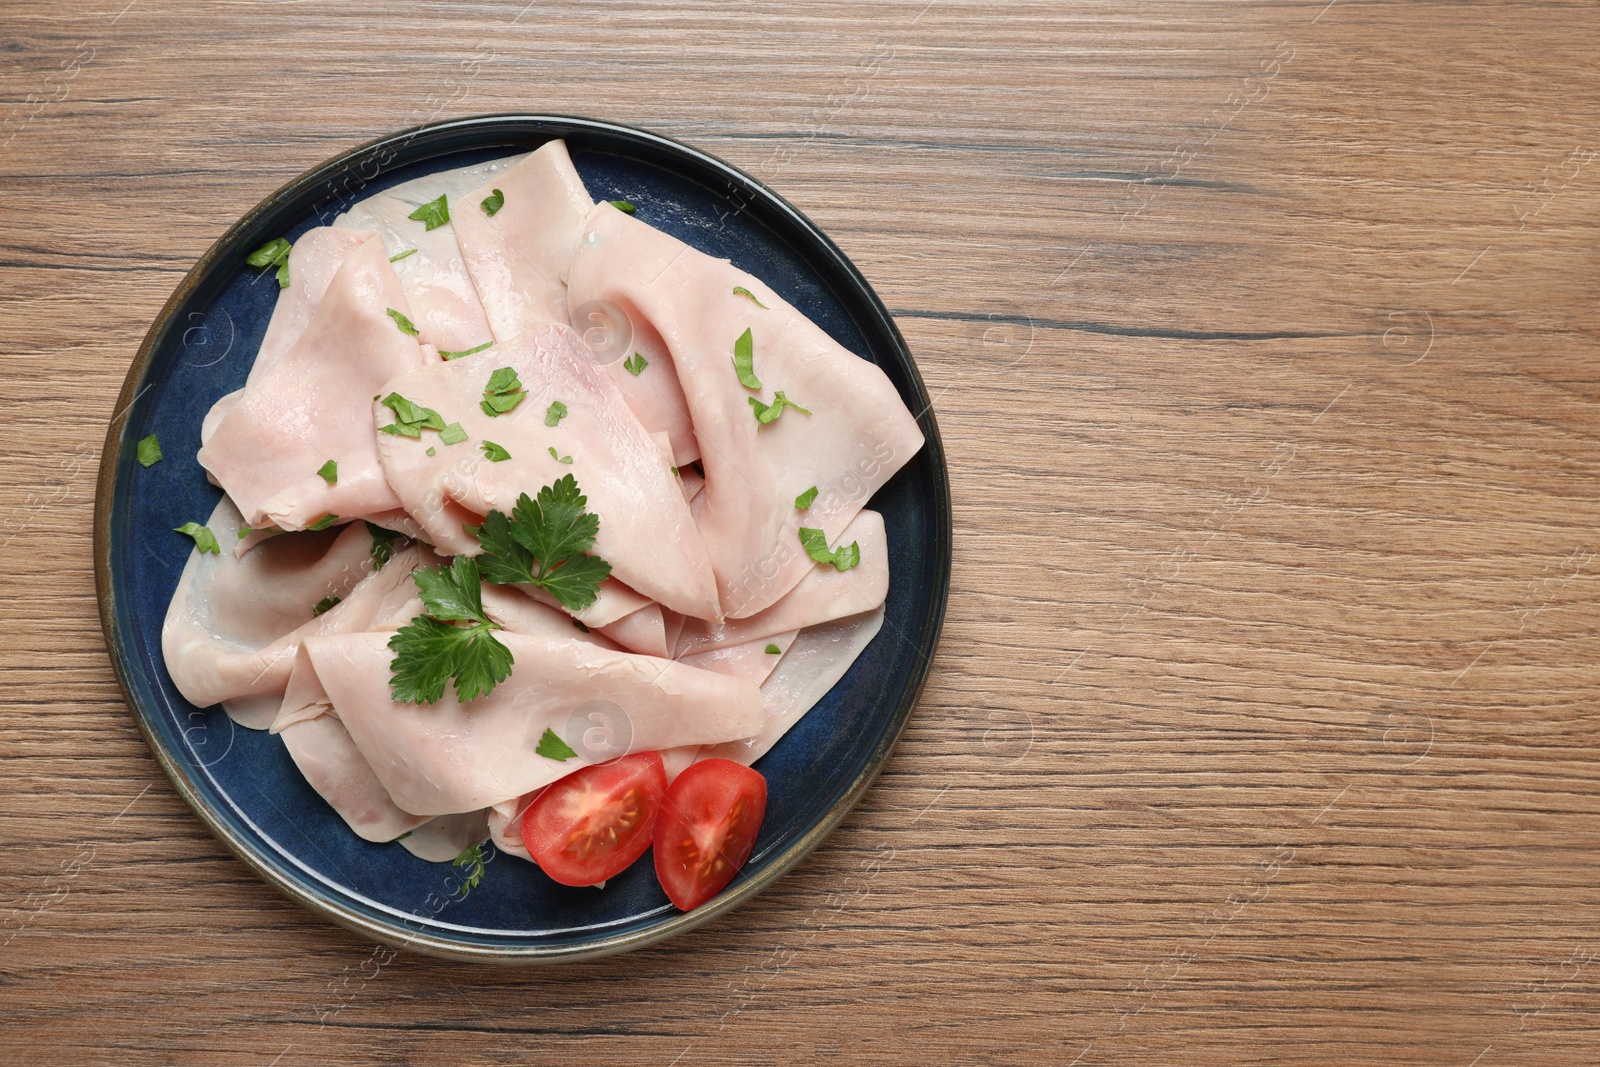 Photo of Delicious ham slices with parsley and tomato on wooden table, top view. Space for text